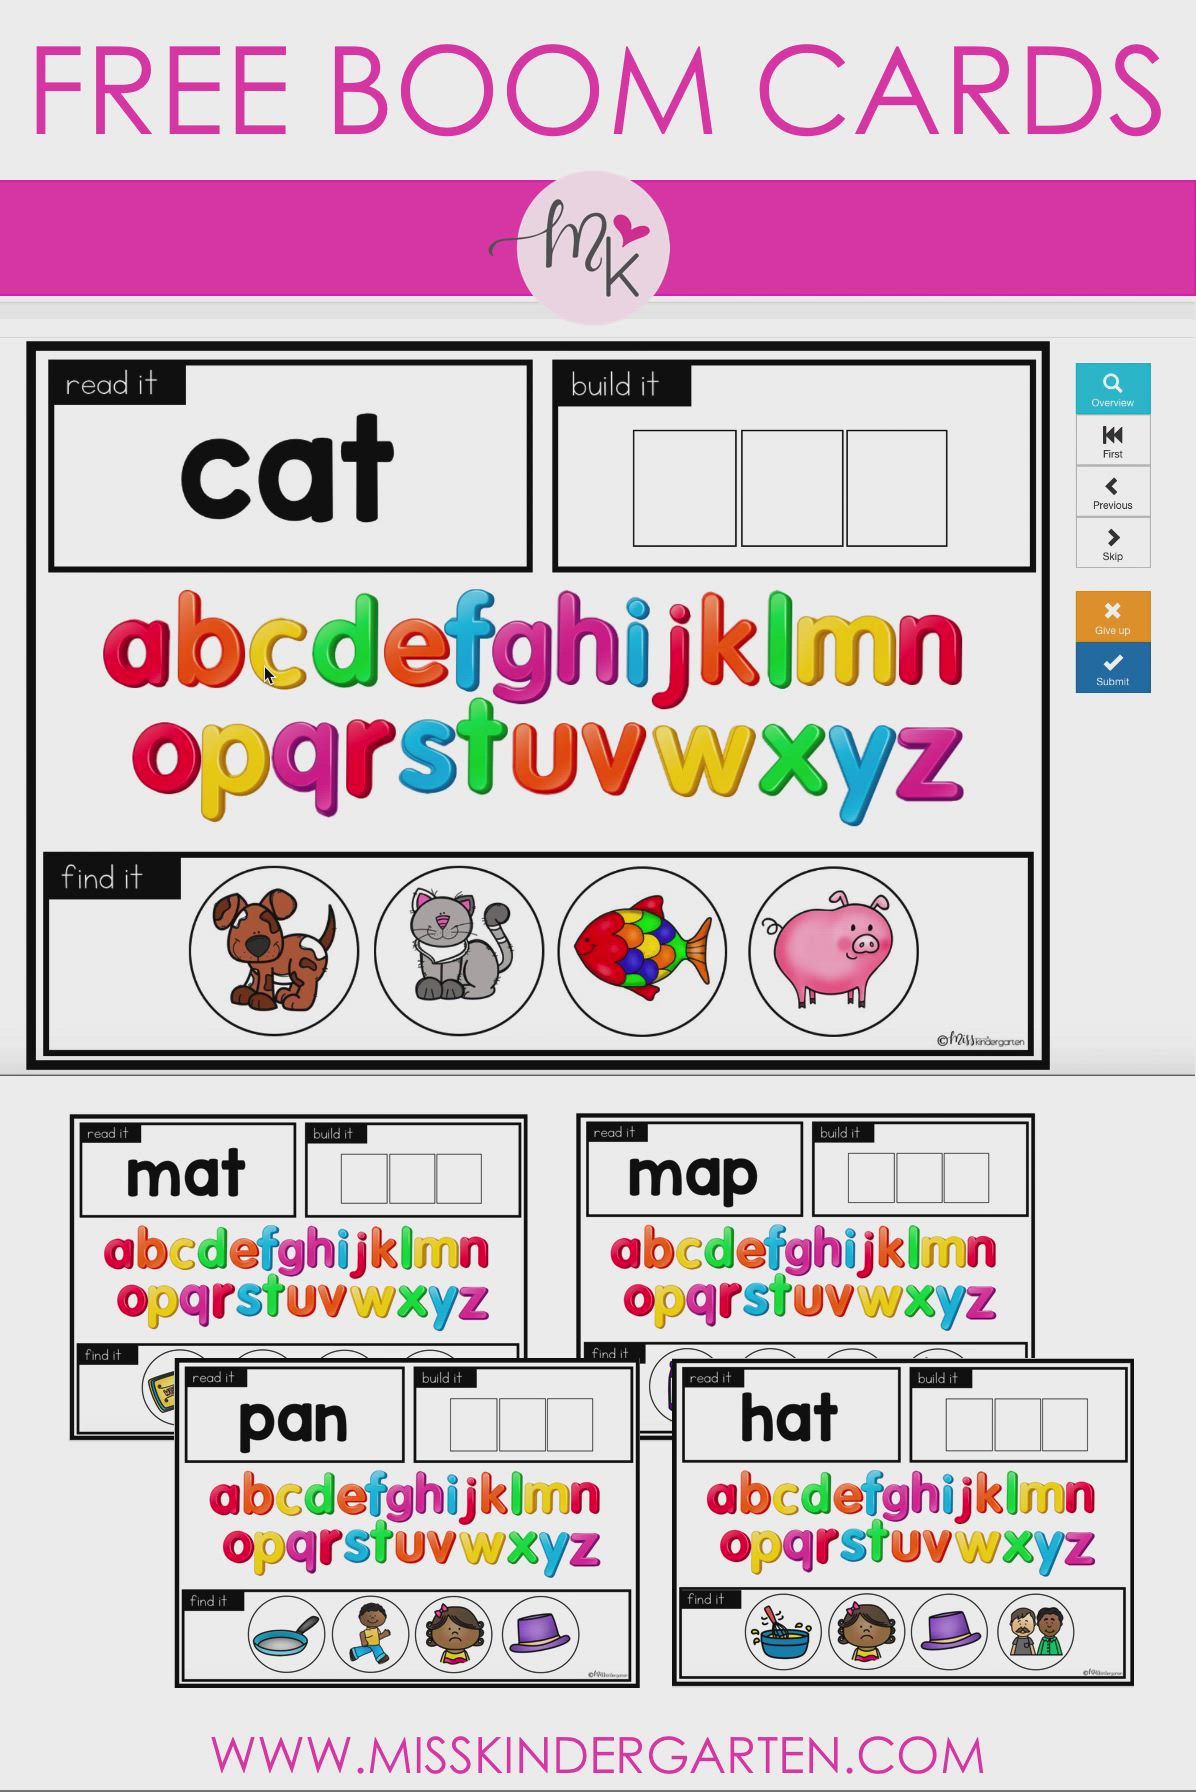 This may contain: the free printable alphabets for kids to use with their own letters and numbers